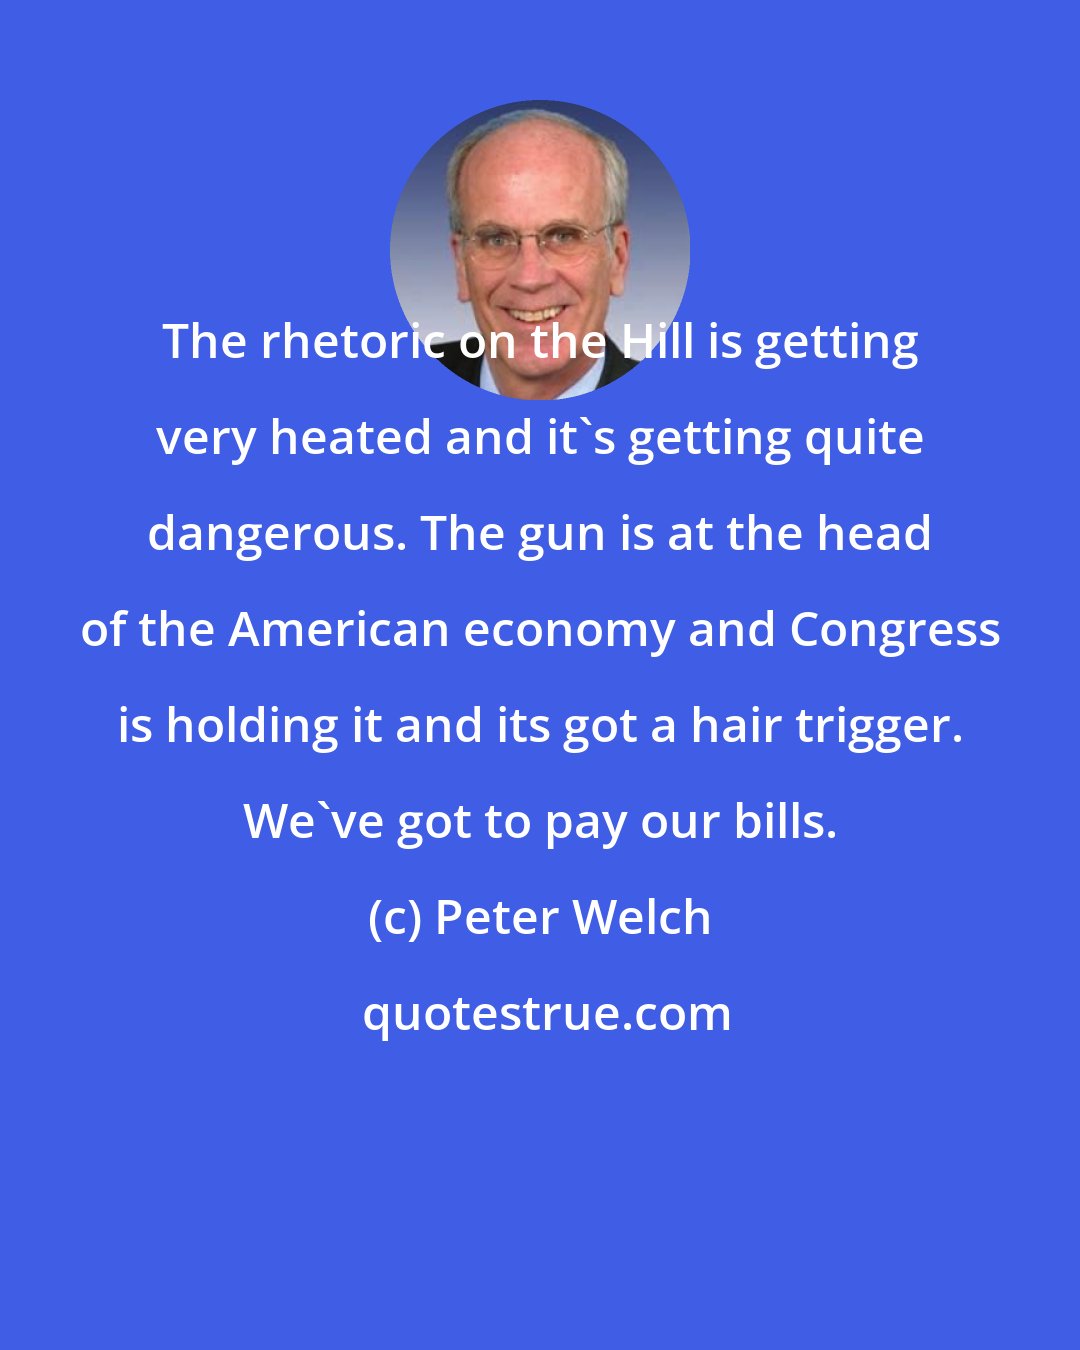 Peter Welch: The rhetoric on the Hill is getting very heated and it's getting quite dangerous. The gun is at the head of the American economy and Congress is holding it and its got a hair trigger. We've got to pay our bills.